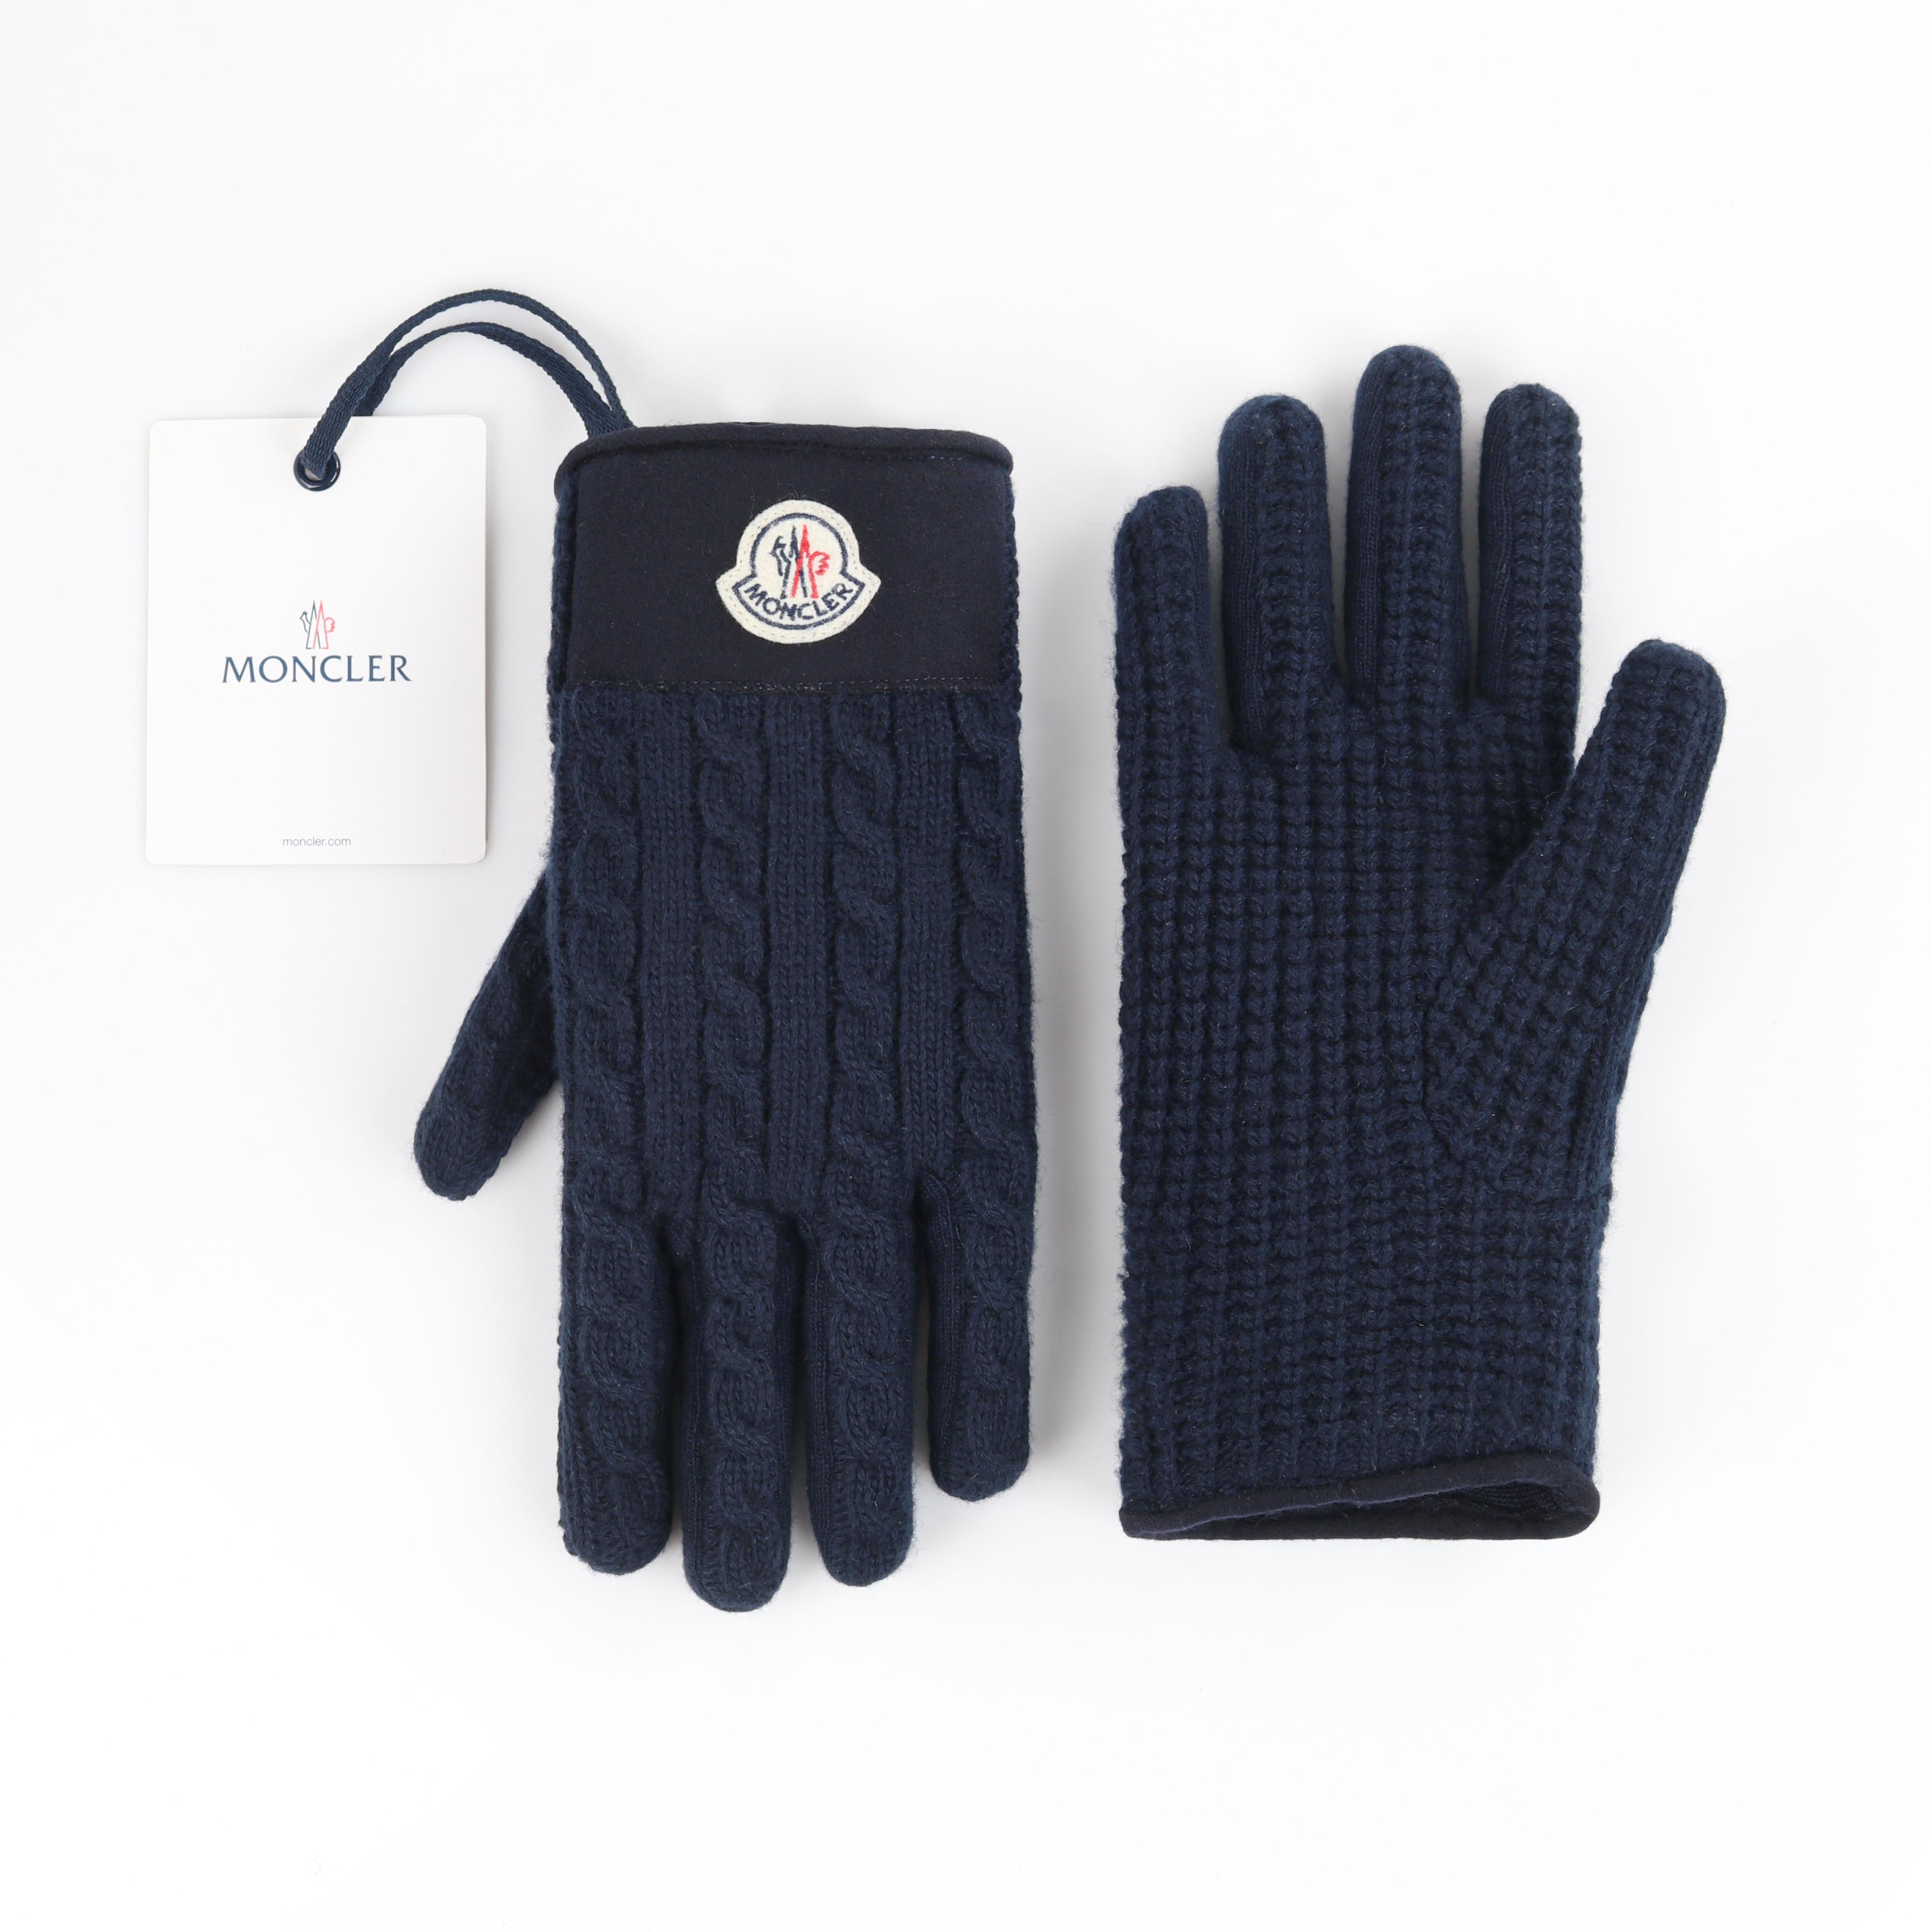 MONCLER c.2017 Navy Blue Chunky Cable Knit Logo Patch Winter Gloves w/ Tags
 
Brand/Manufacturer: Moncler 
Circa: 2017
Style: Knit gloves
Color(s): Shades of blue, off white, red
Lined: Yes 
Unmarked Fabric Content (feel of): Wool
Additional Details